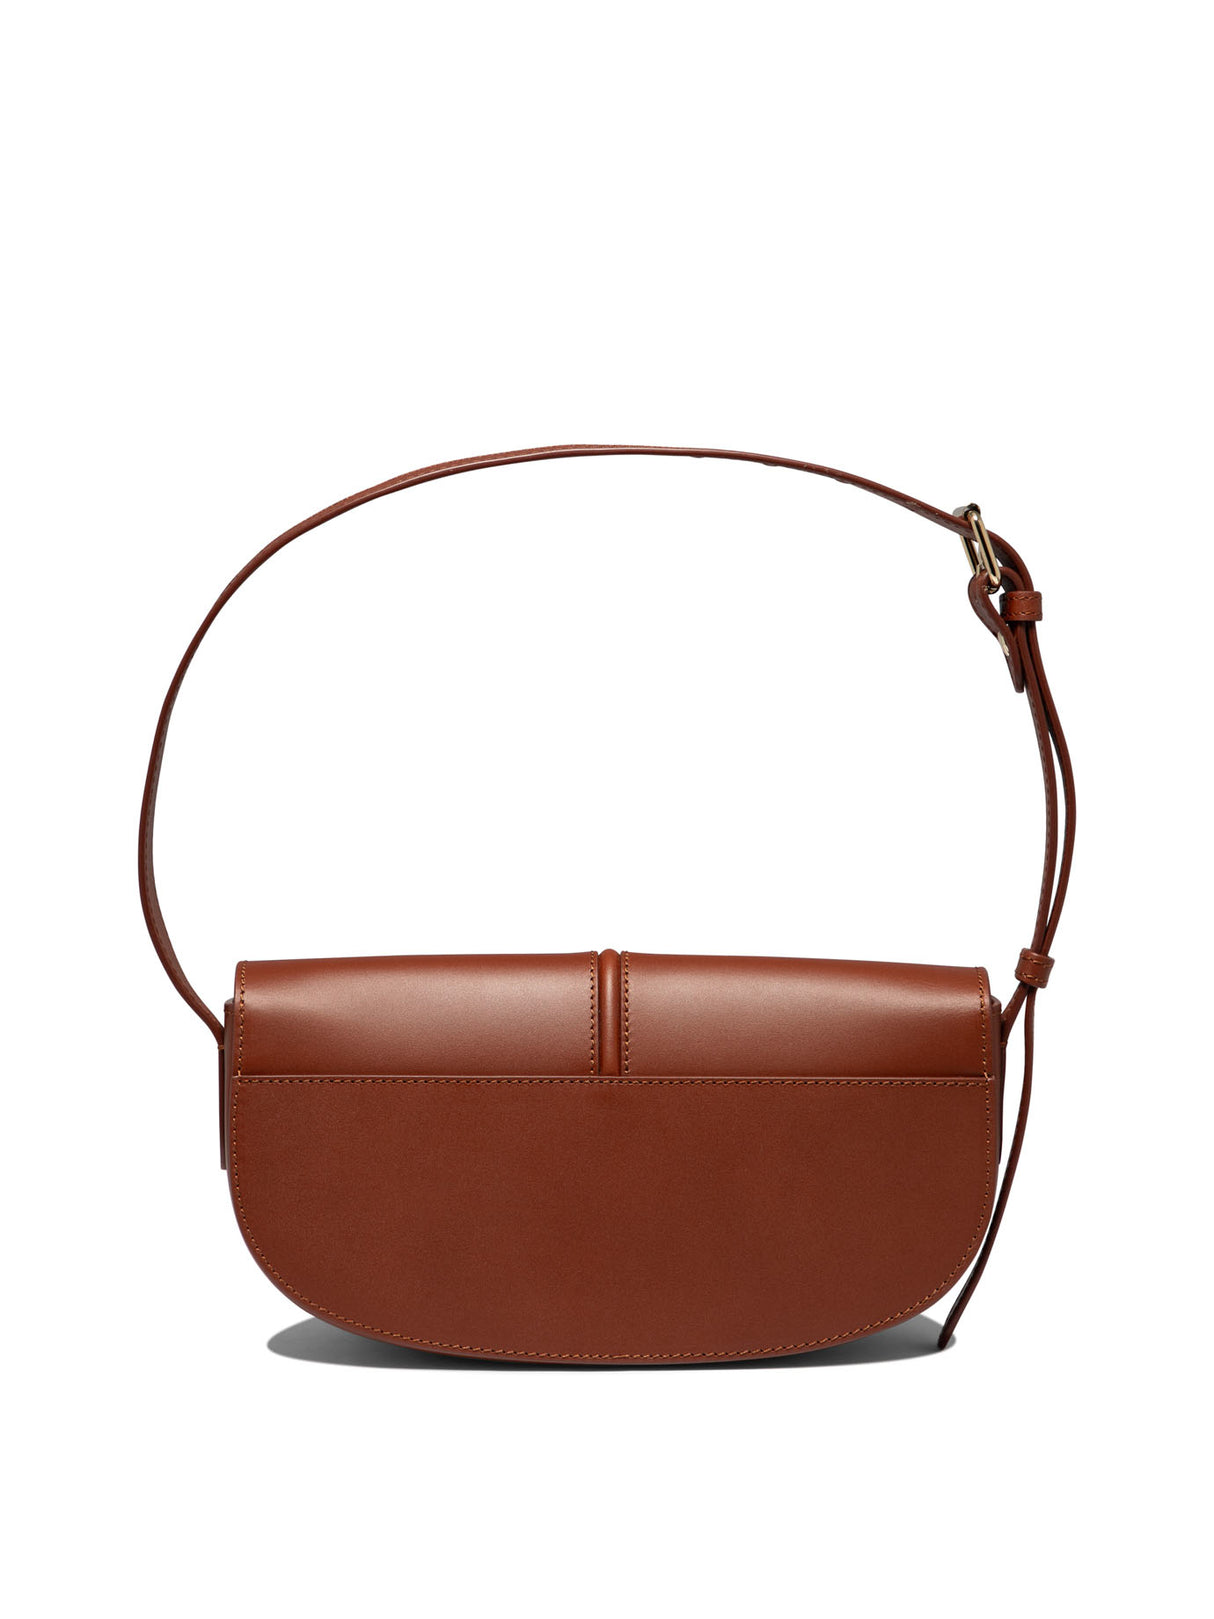 A.P.C. Brown Leather Shoulder Bag for Women - FW24 Collection